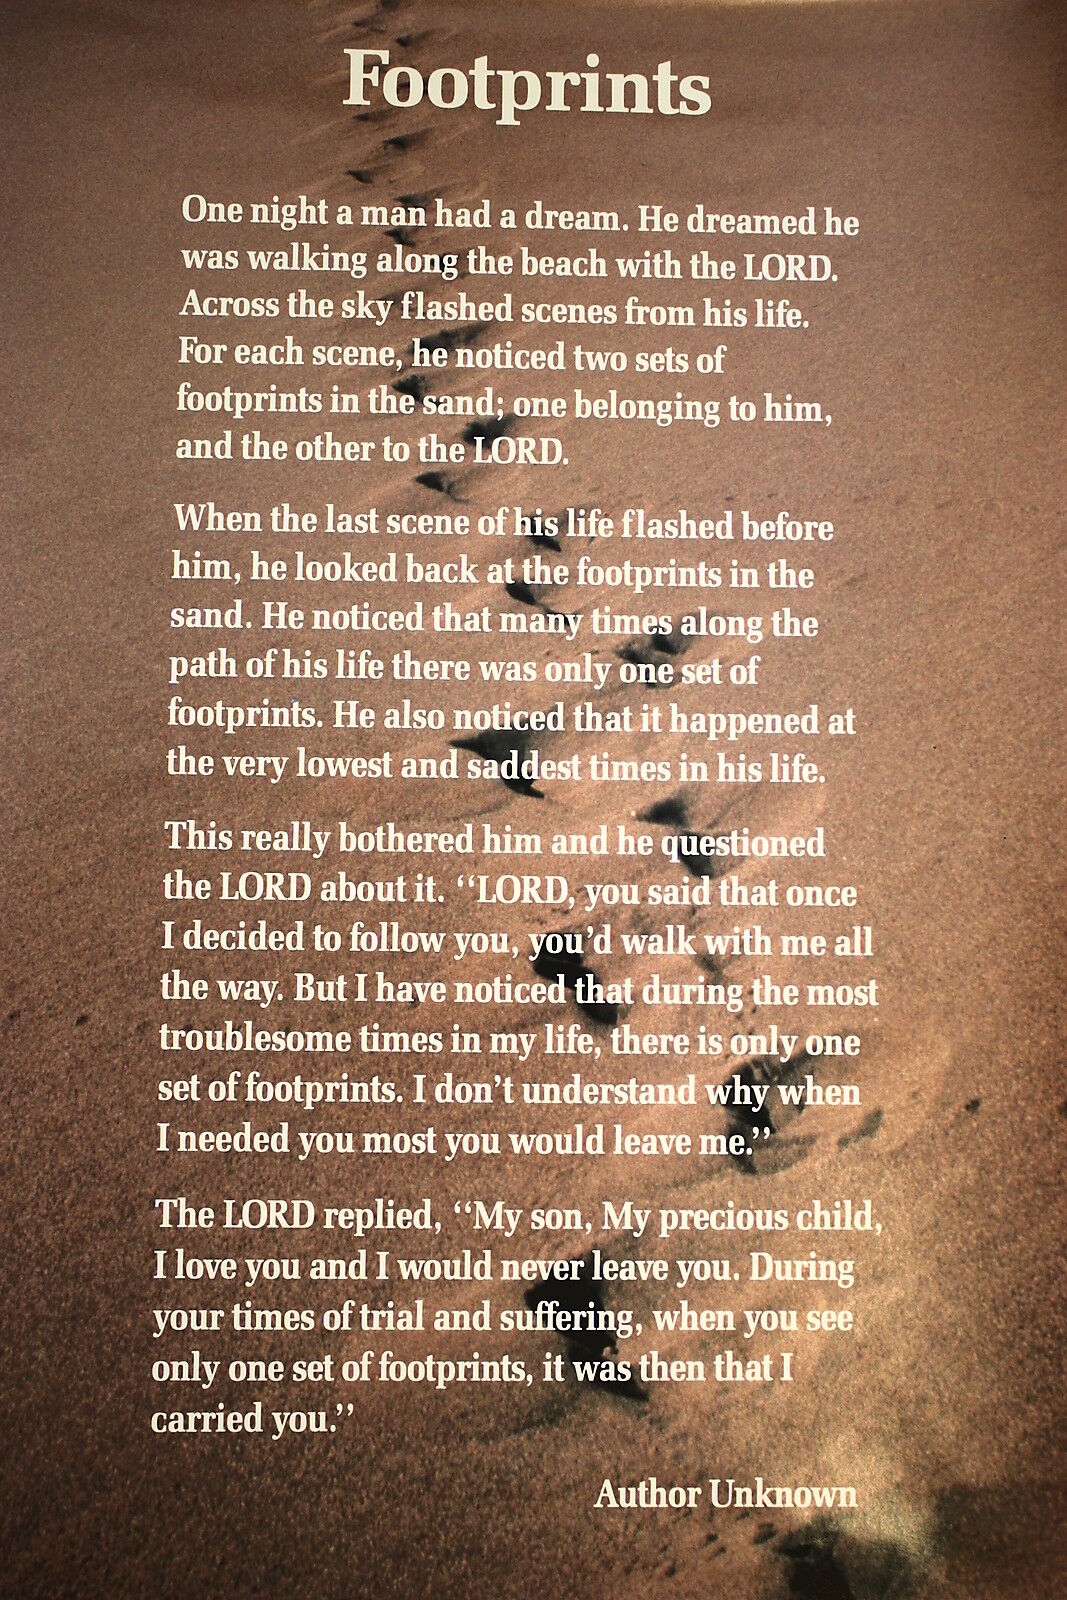 NEW - FOOTPRINTS IN THE SAND POEM - LARGE POSTER SIZE - 23x15 - 